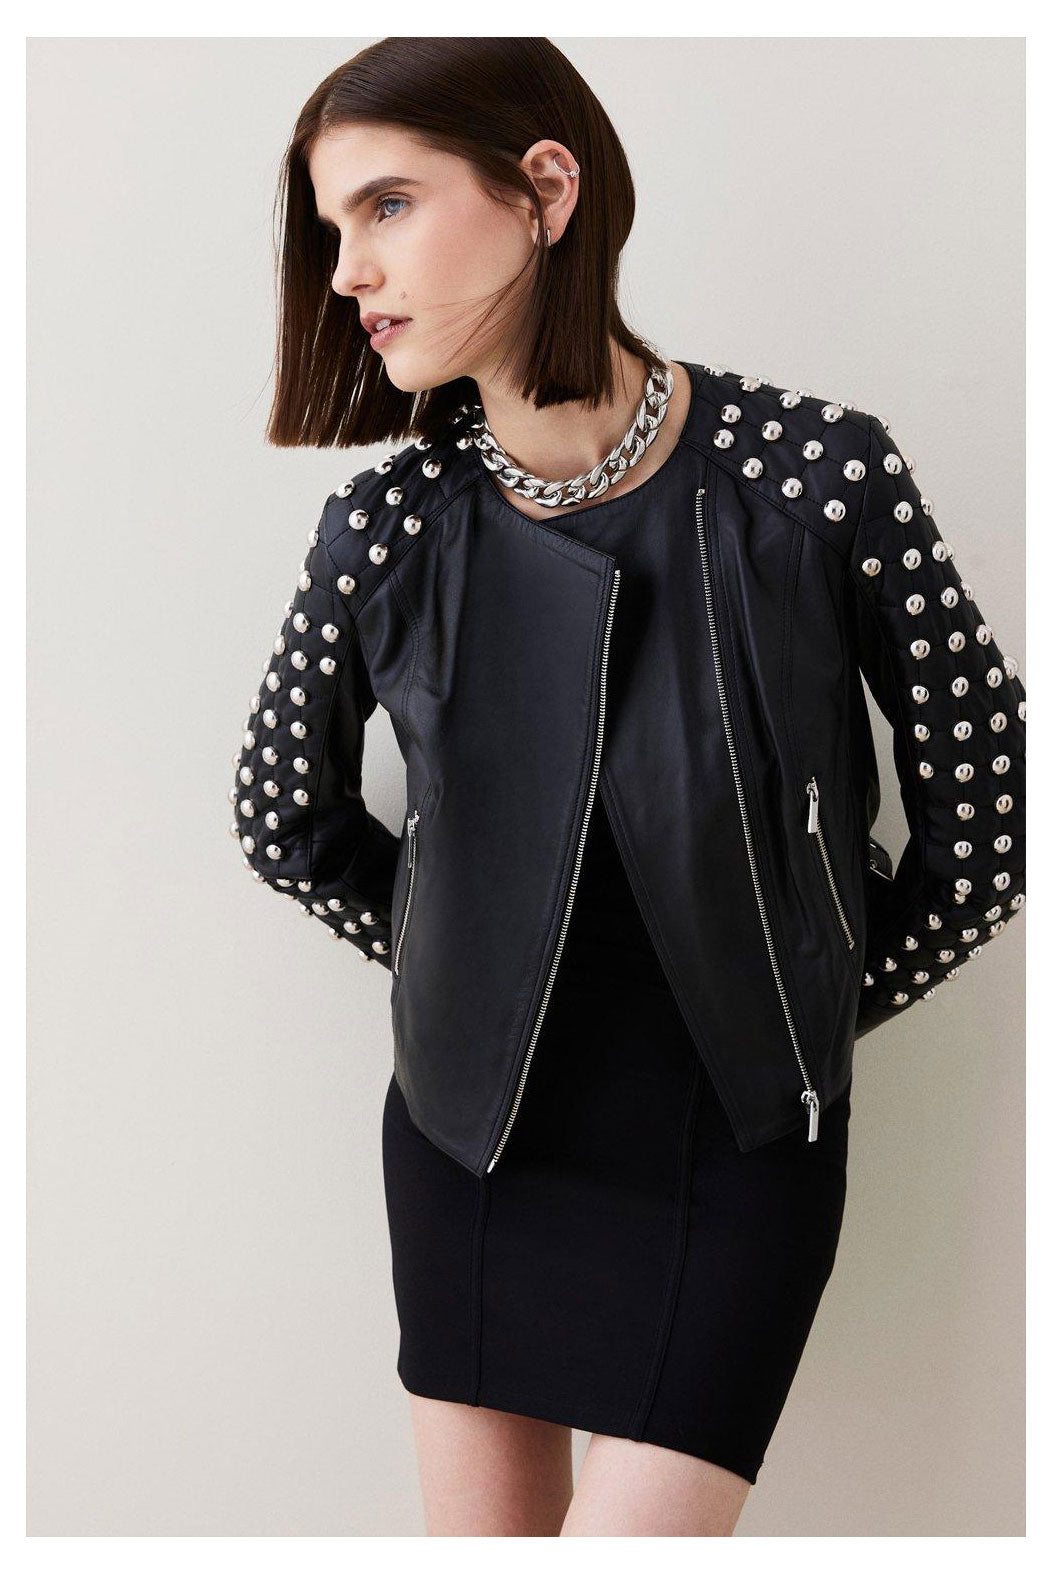 Black Women Style Silver Spiked Studded Leather Jacket